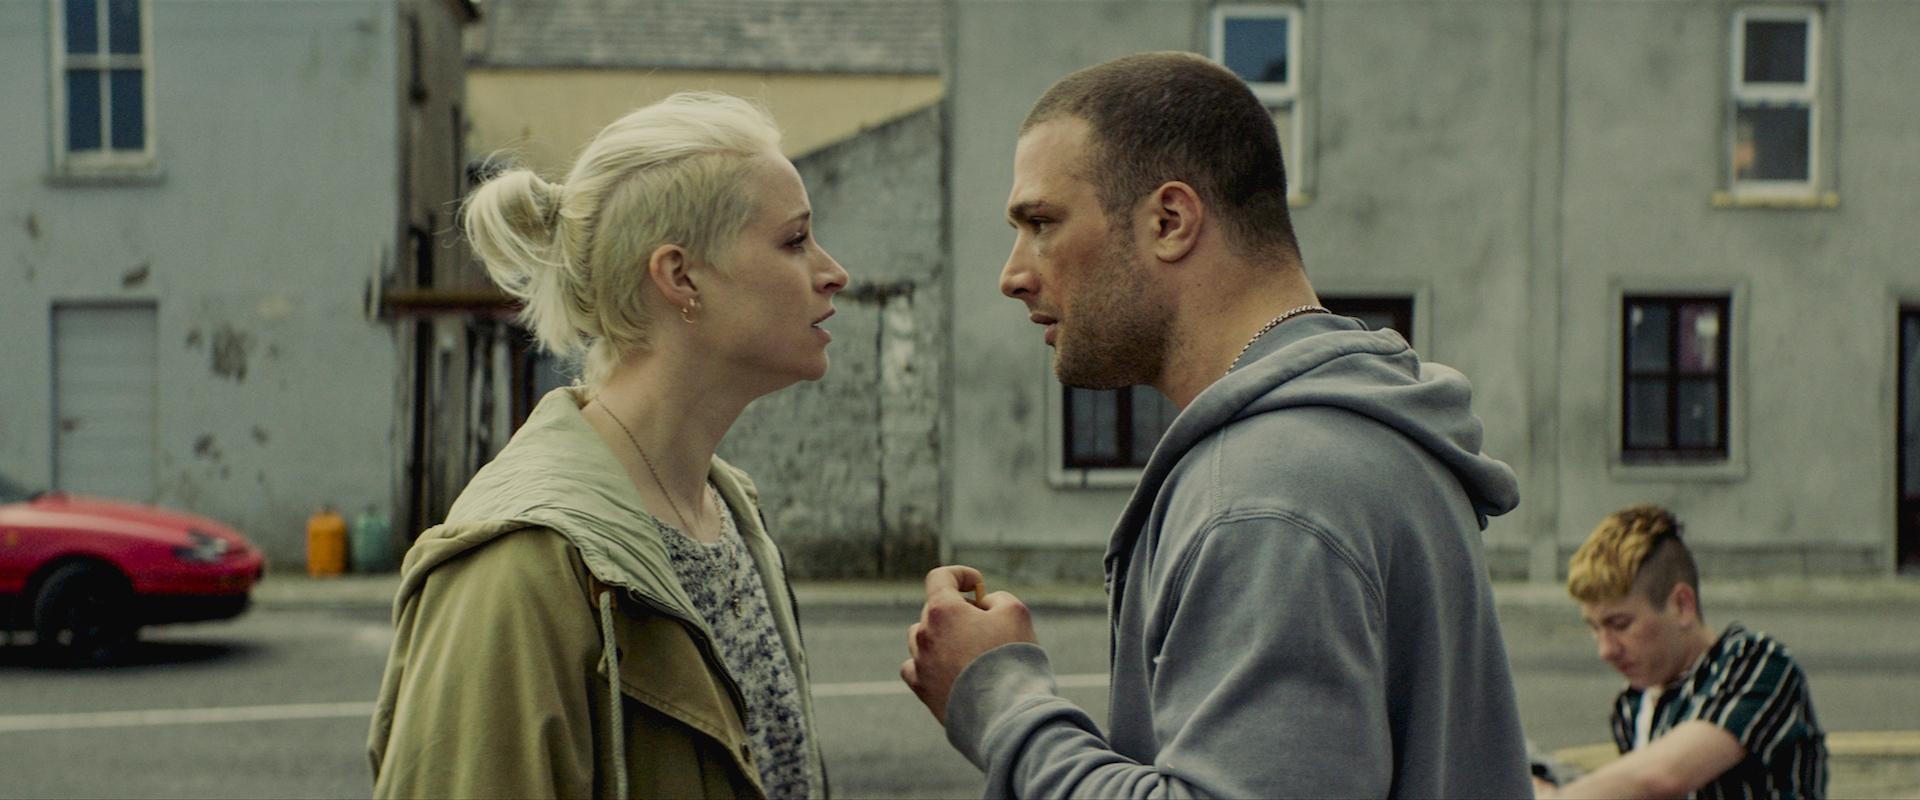 Niamh Algar and Cosmo Jarvis in 'Calm With Horses'